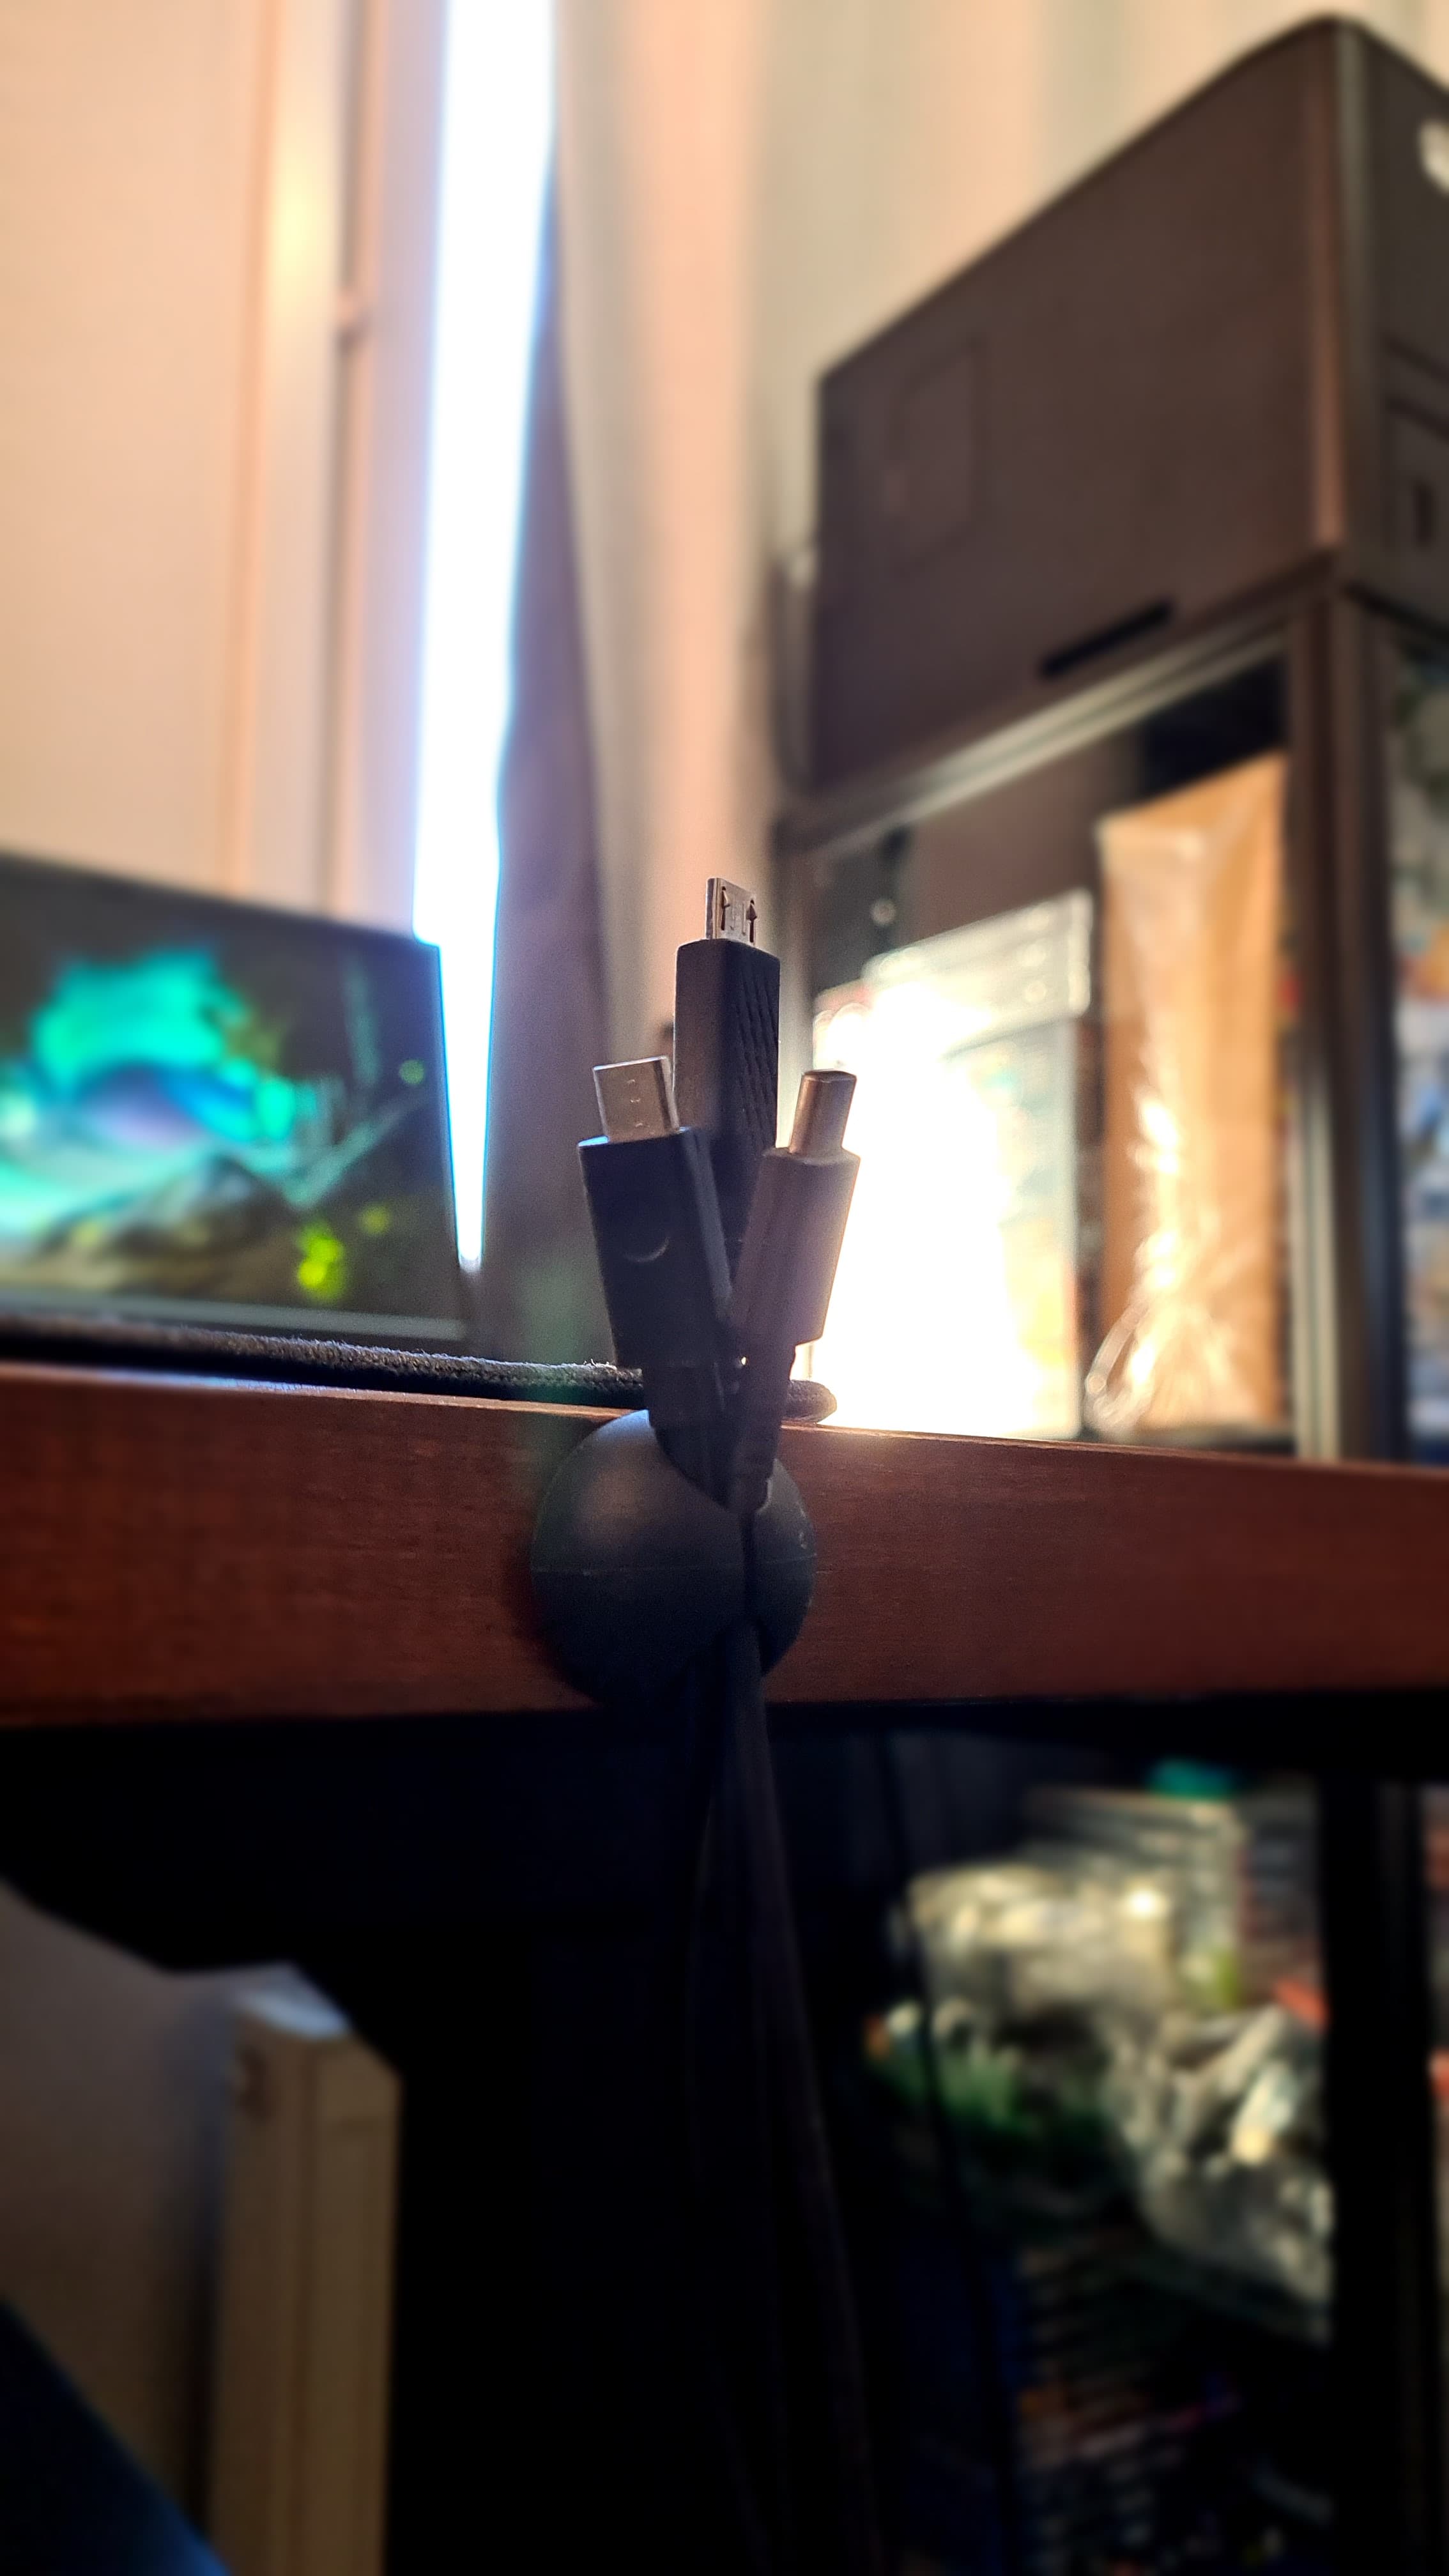 Cable holder managing chargers and cables